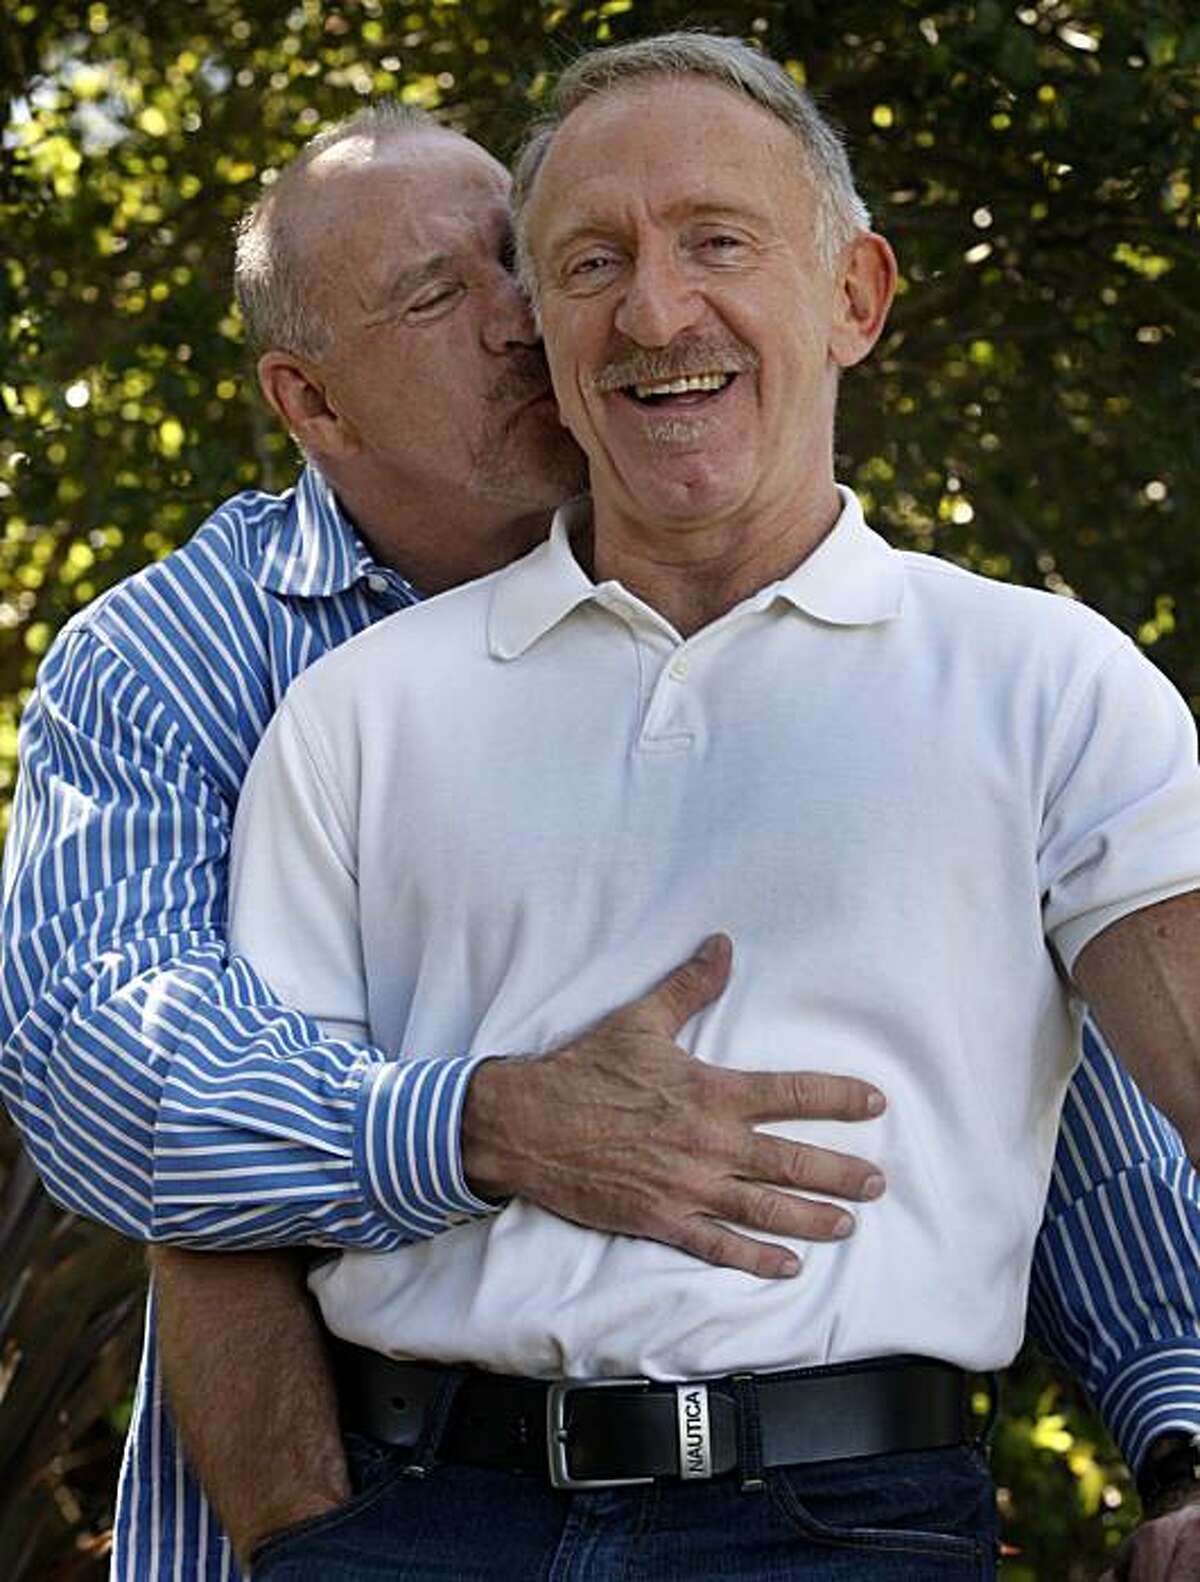 Blake Spears (right) and his partner of 35 years Lanz Lowen relax at their home in Oakland, Calif., on Wednesday, July 14, 2010. The unmarried couple recently completed a self-funded four-year study on open relationships among long-term gay male couples.